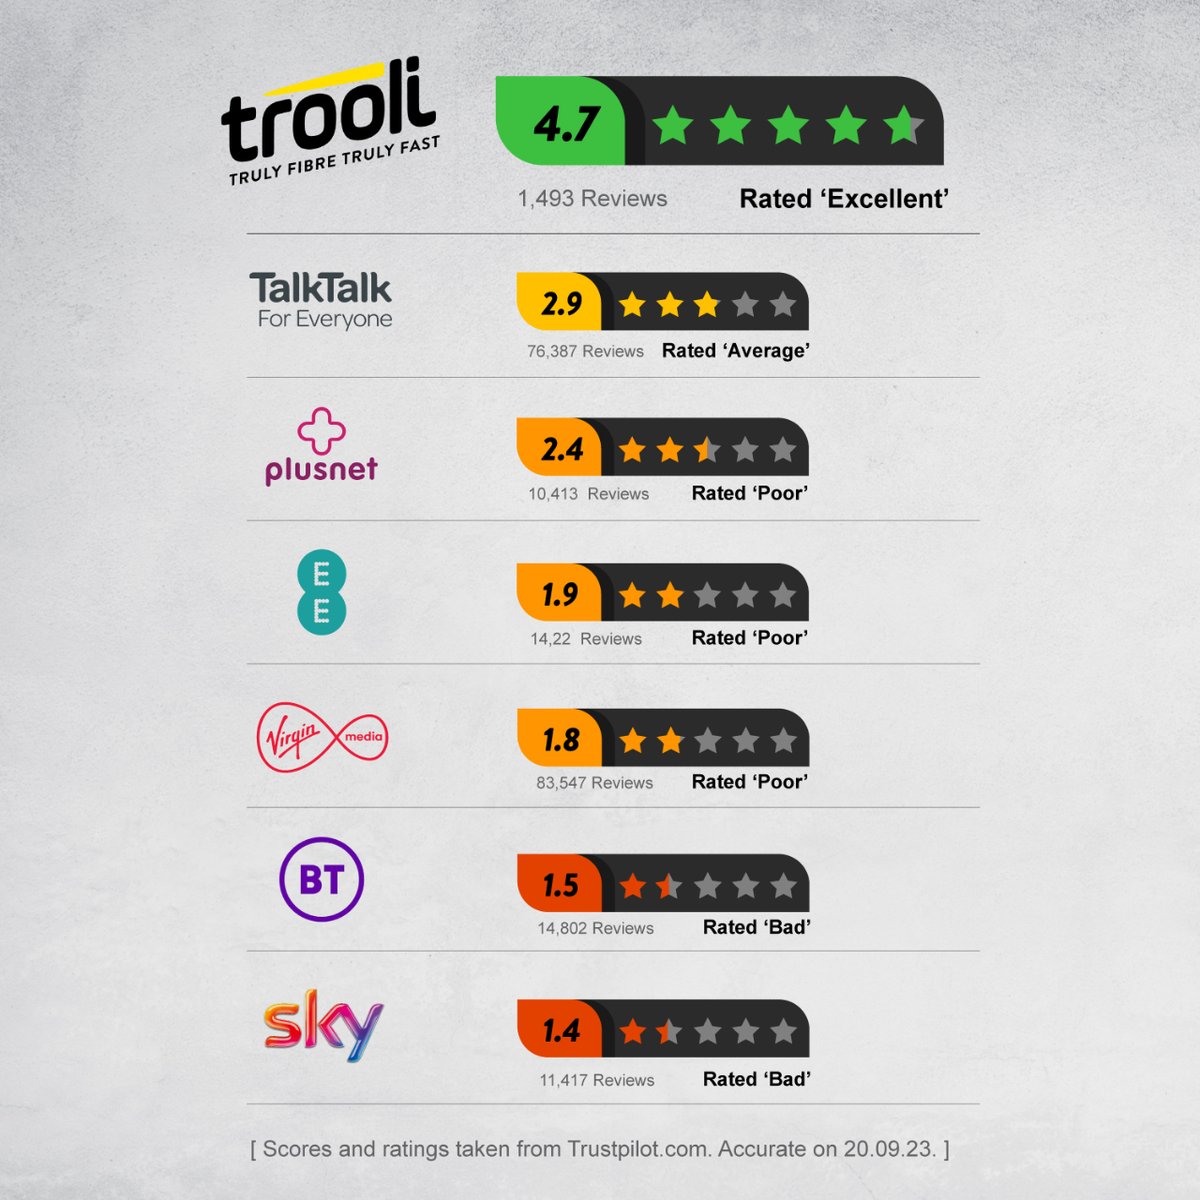 Haven't got time to compare broadband providers on Trustpilot?  We've saved you the trouble 👀

Join Trooli today and see why so many others are glad to have made the switch.  trooli.com 

#FibreOptic #BroadbandSolutions #InternetProvider #HappyCustomers